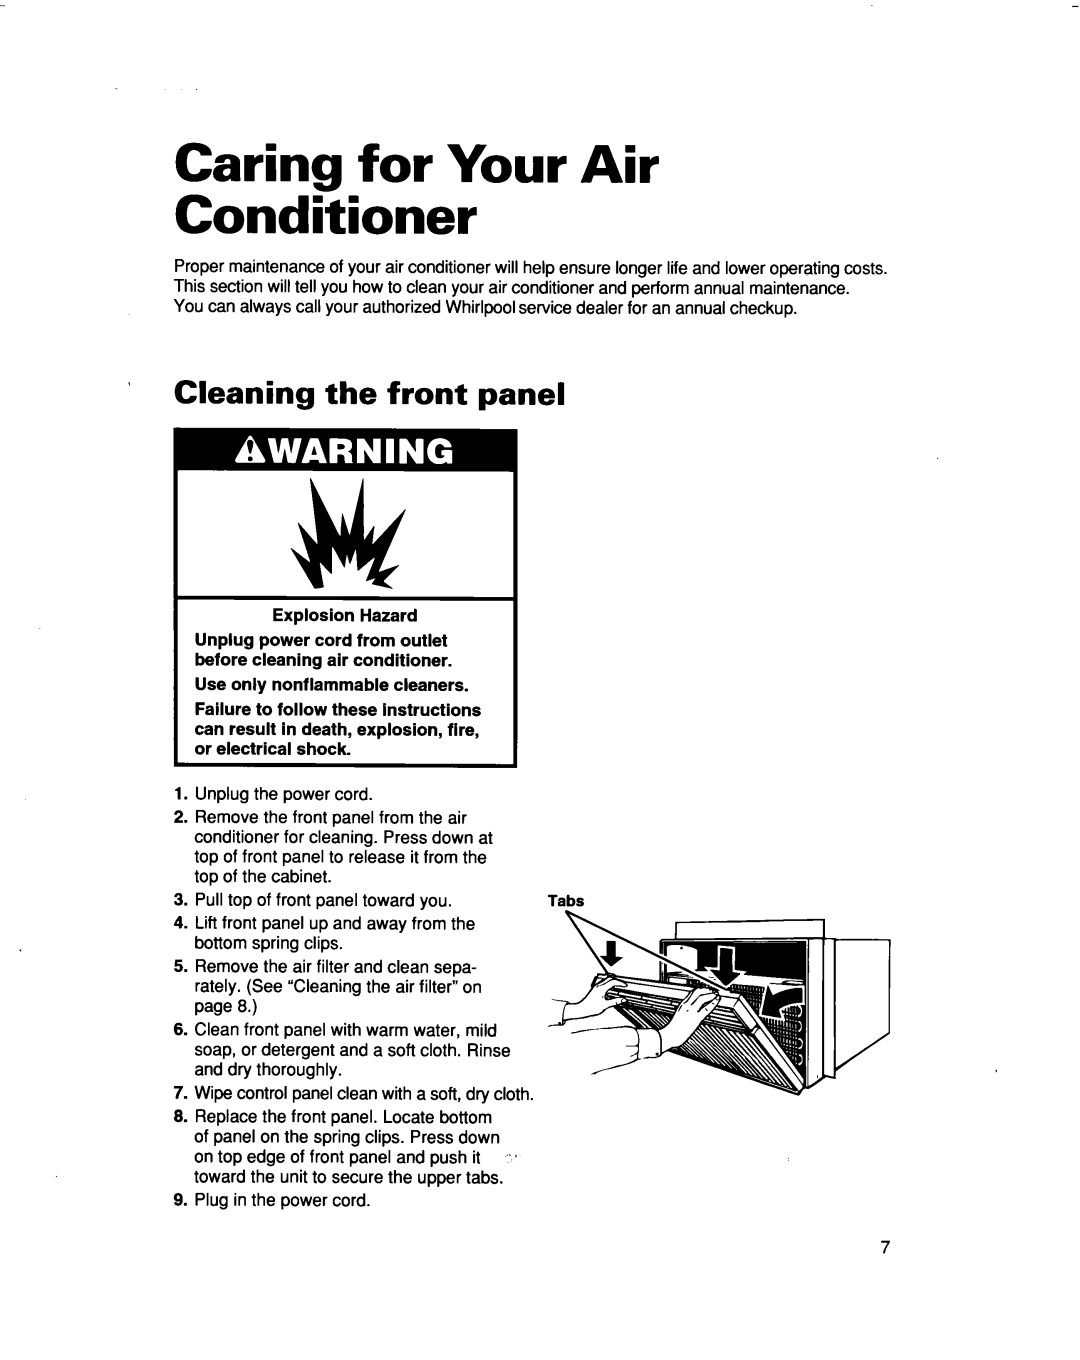 Whirlpool ACM492 warranty Caring for Your Air Conditioner, ’Cleaning the front panel 